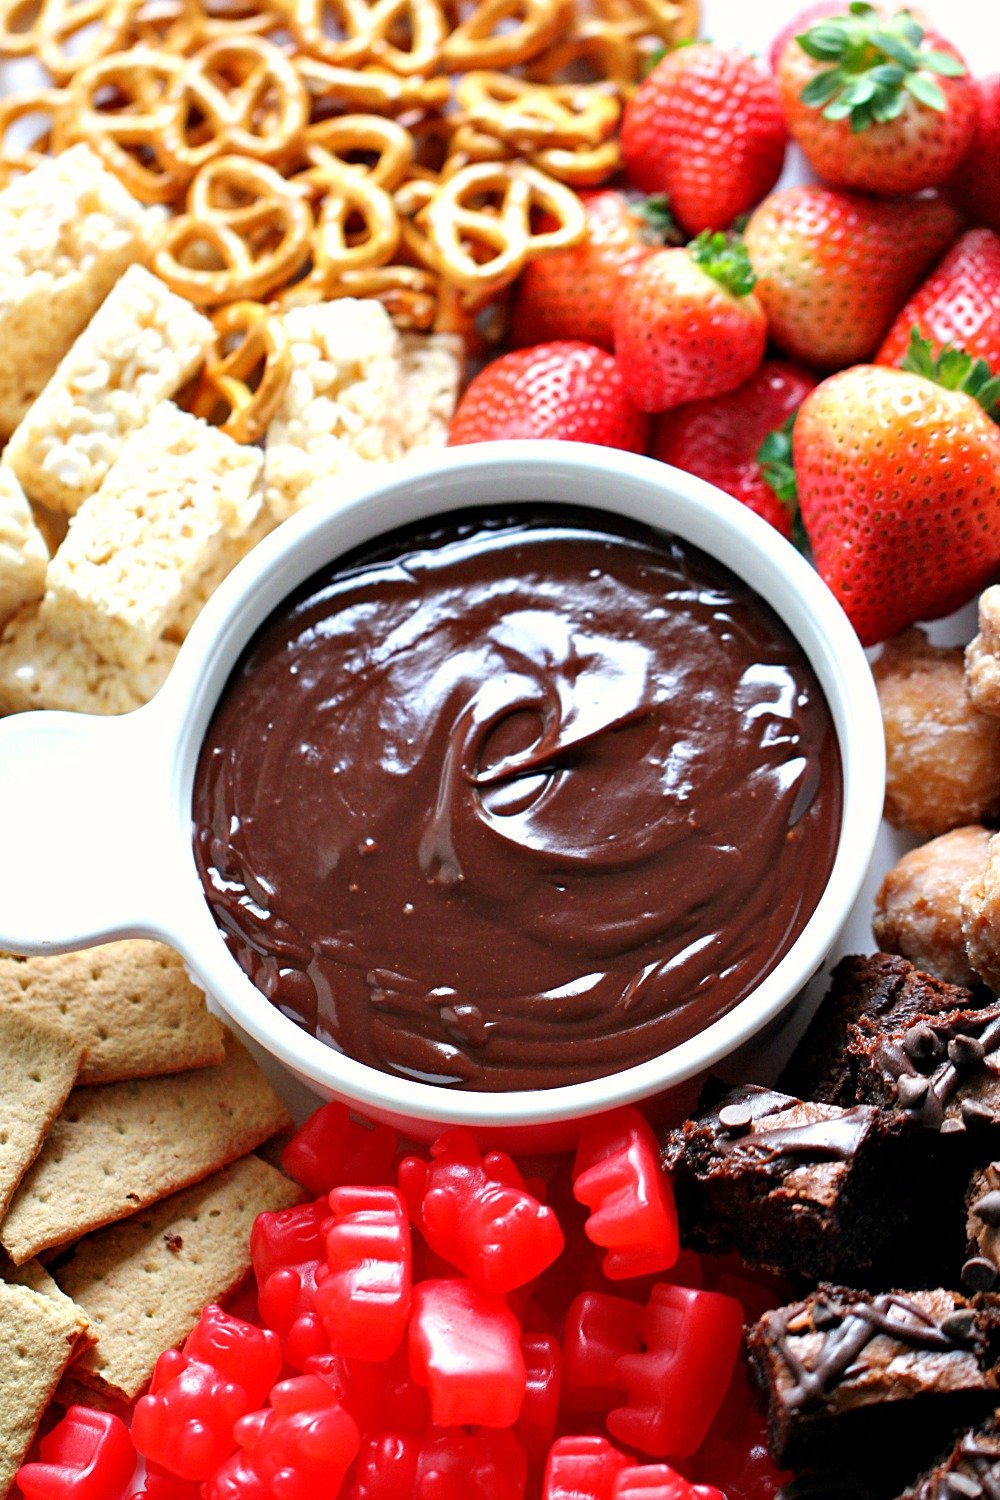 Instant Pot Chocolate Fondue - Melted Chocolate for Dipping Food & Fruit